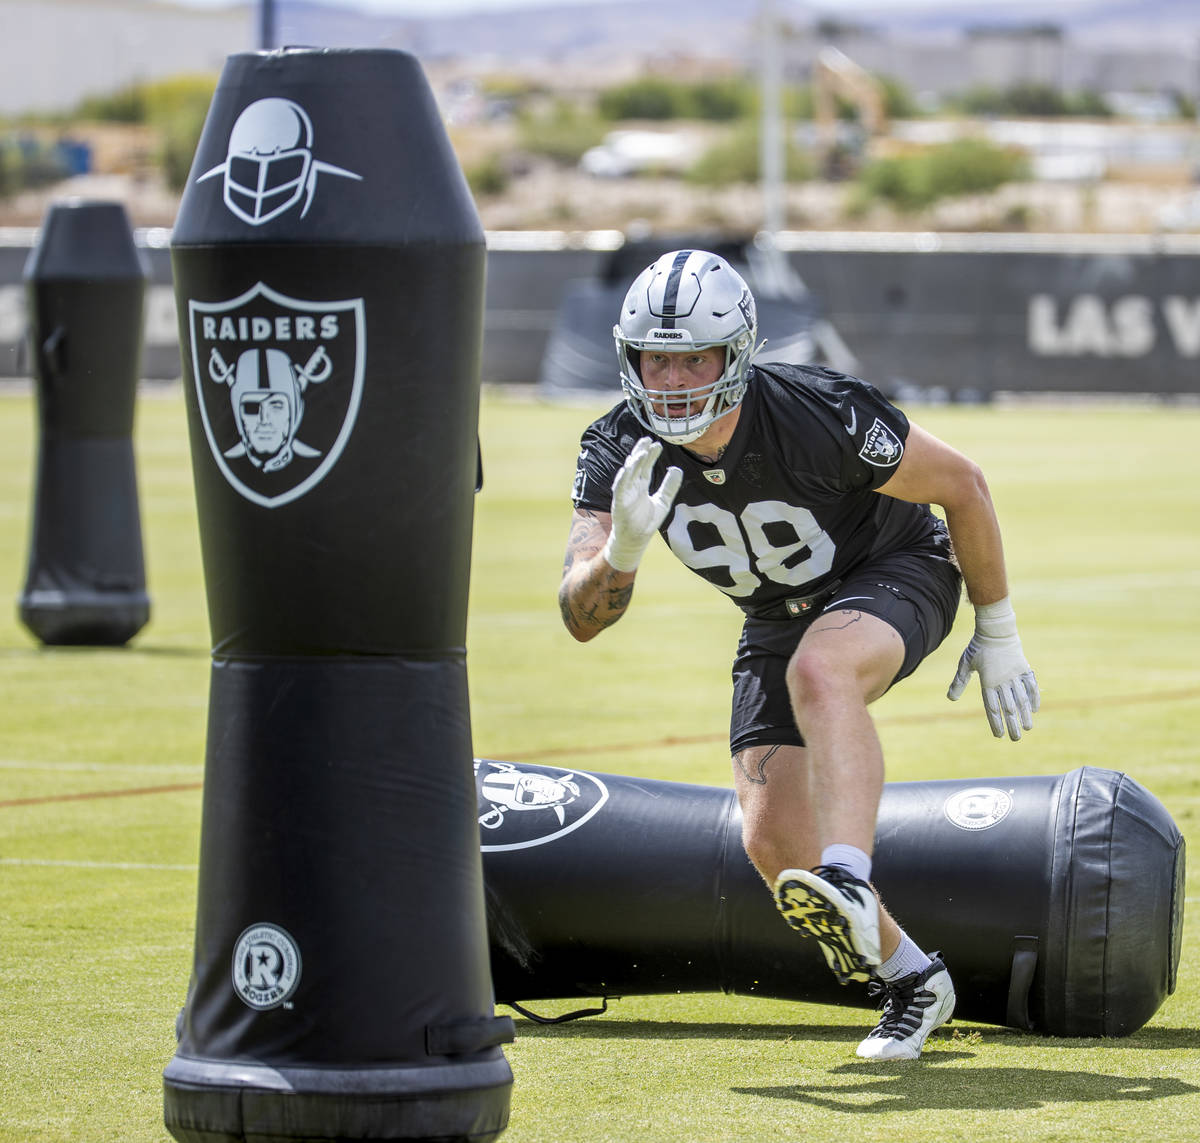 Defensive end Maxx Crosby (98) runs a drill during a Las Vegas Raiders open practice at the Int ...